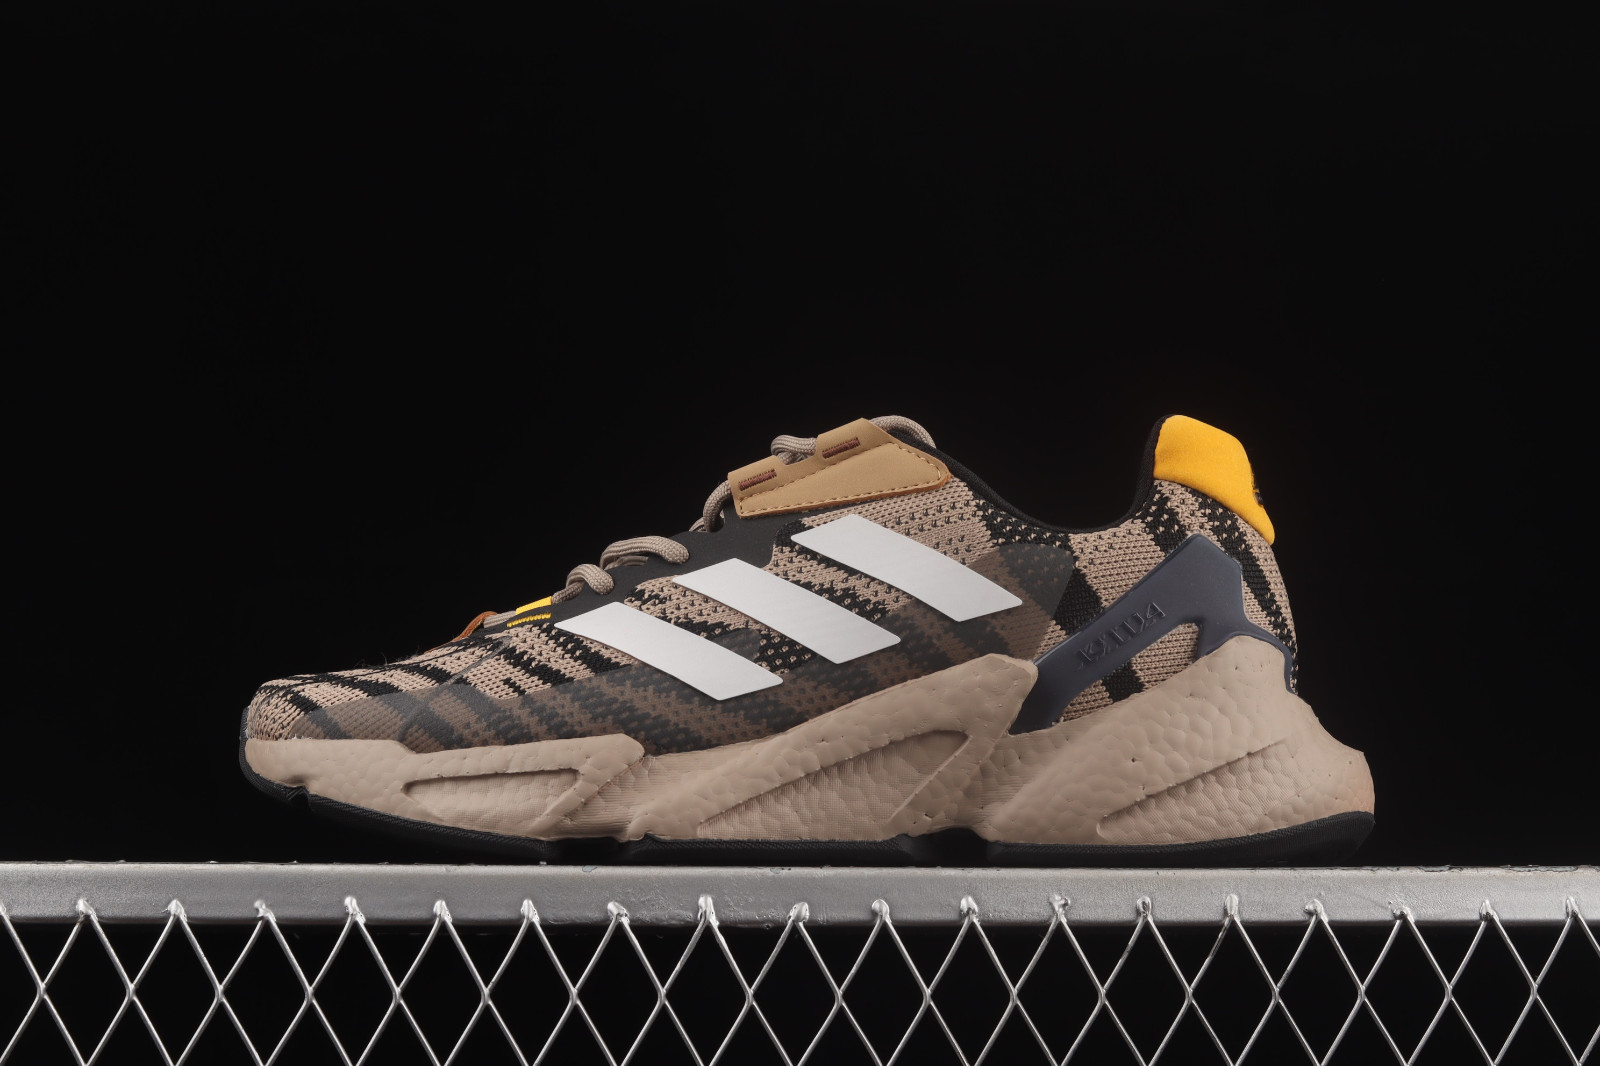 Adidas Ultraboost All Terrain Olive Core Black Yellow S23682 adidas outlet phnom penh airport hotel new york - Sepsale